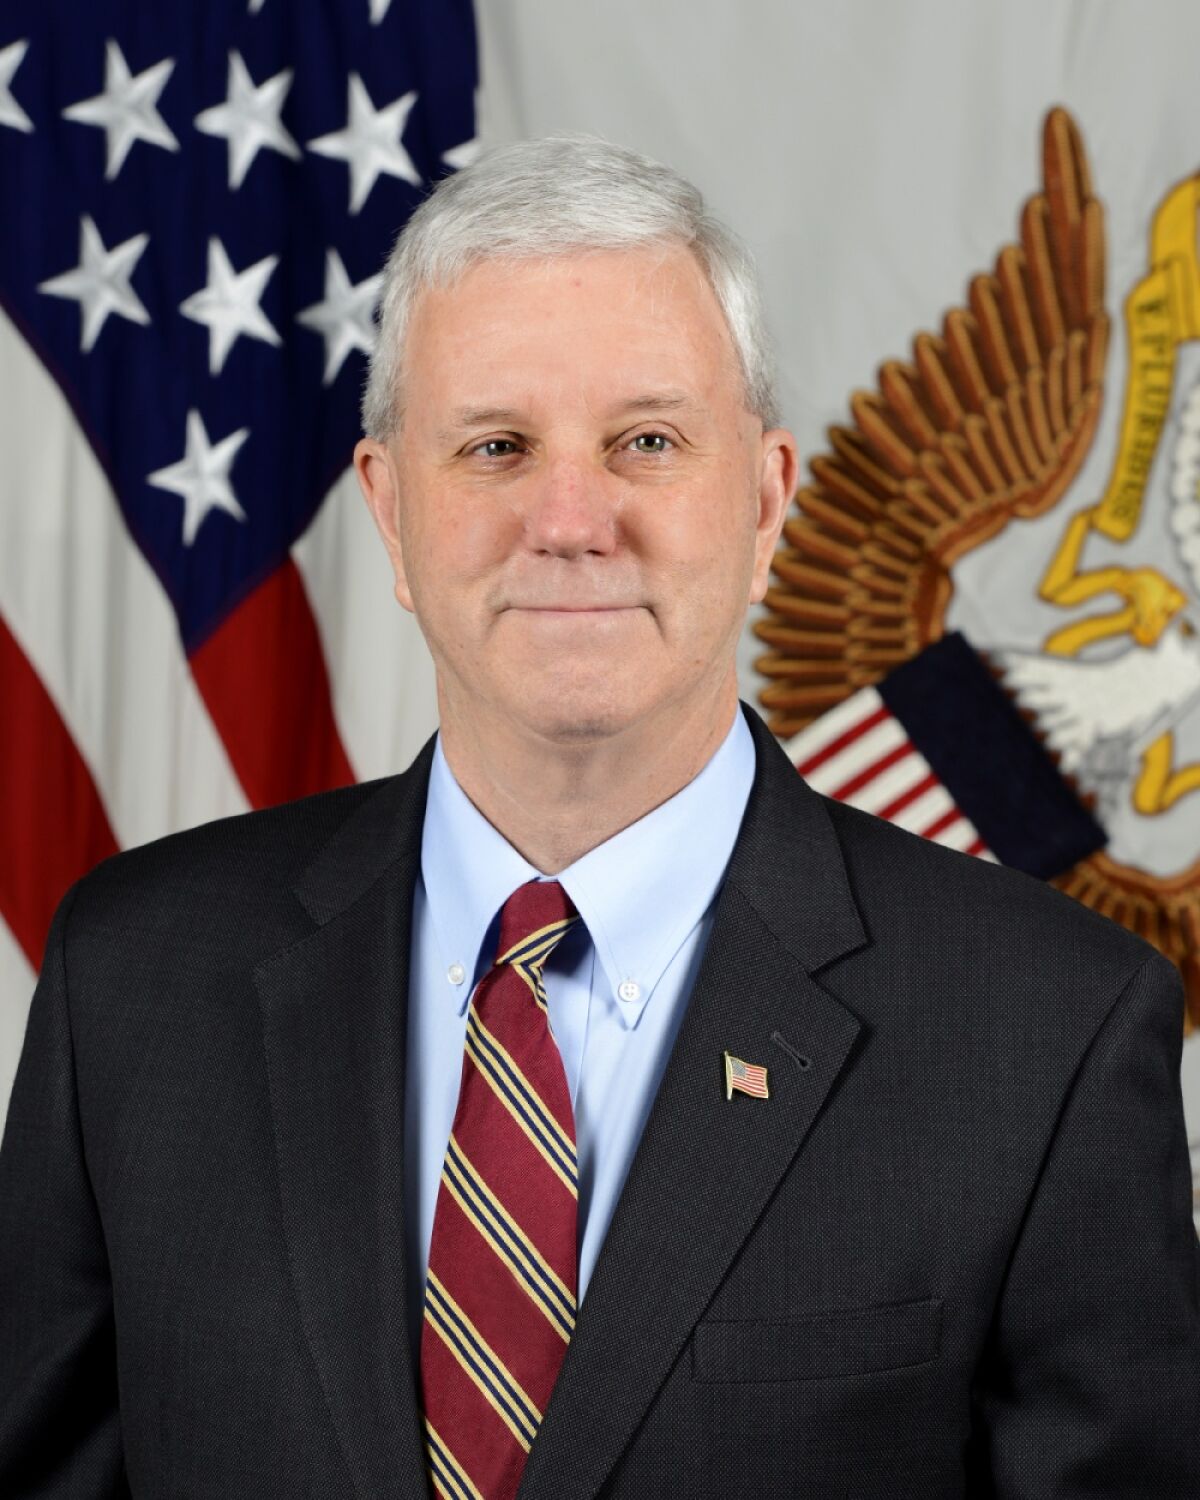 Retired Rear Adm. James E. McPherson, currently the Undersecretary of the Army, has been selected as the new acting Secretary of the Navy. The San Diego native is a graduate of San Diego State University and the University of San Diego School of Law. He previously served as the Judge Advocate General of the Navy.